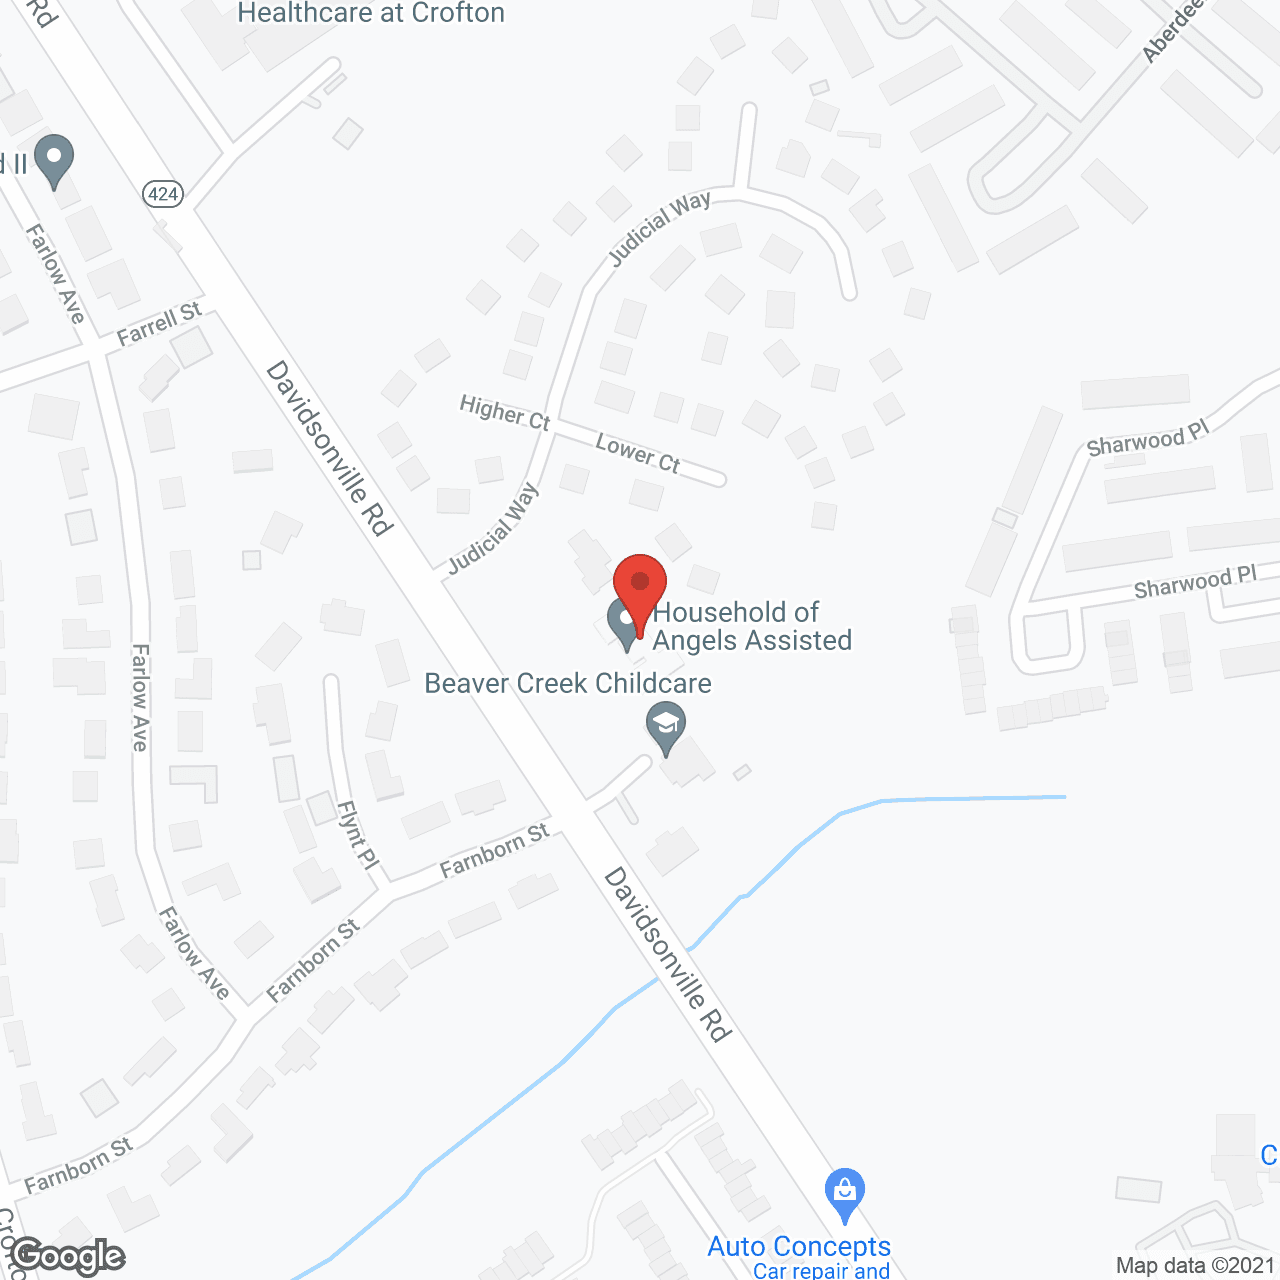 Household of Angels - Crofton in google map